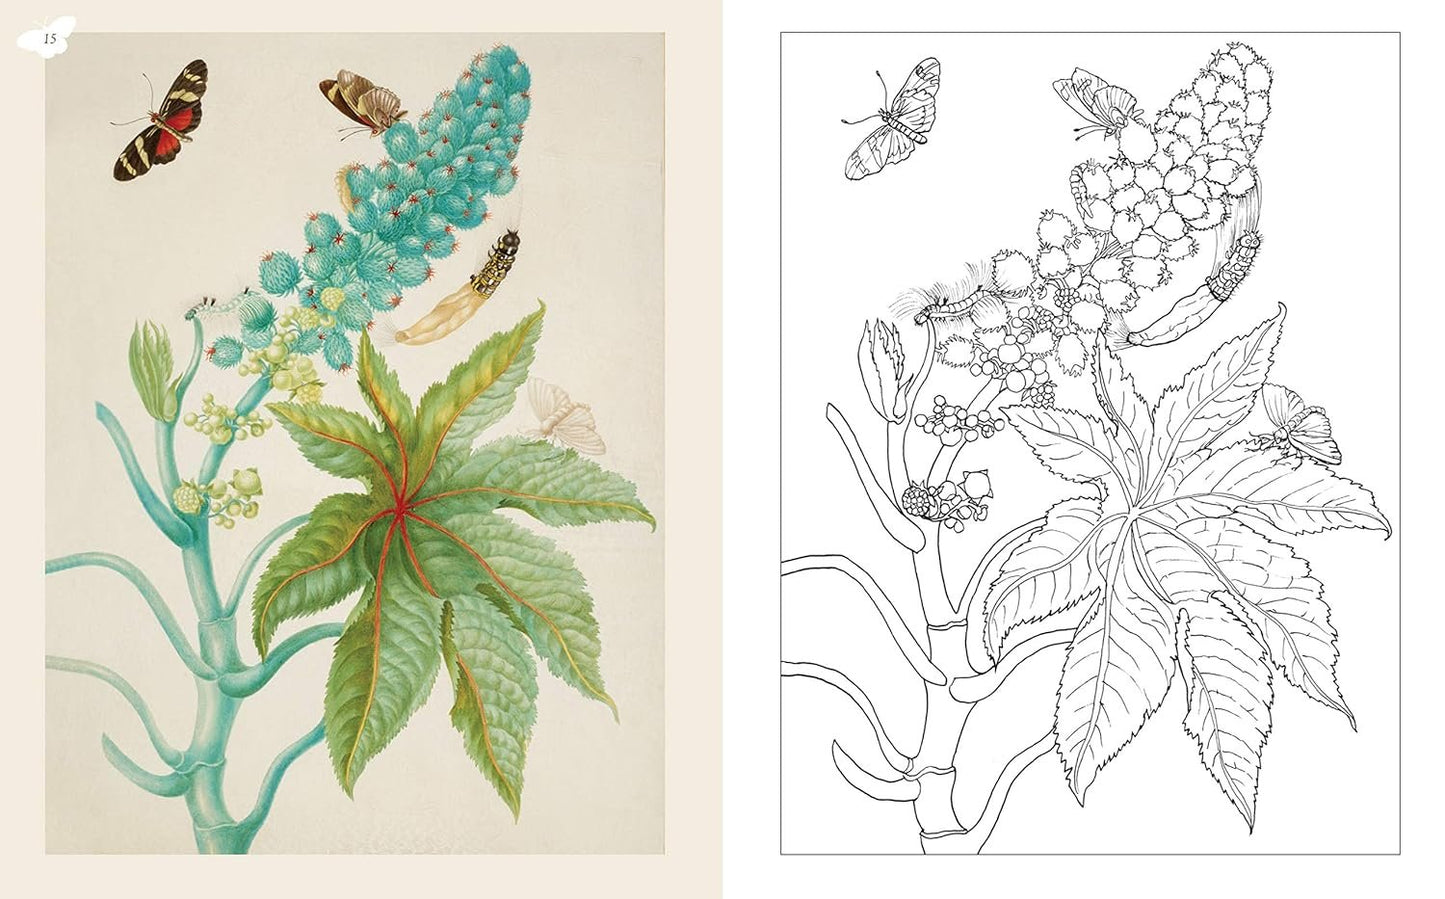 Maria Merian's Butterflies Coloring Book: Drawings from the Royal Collection